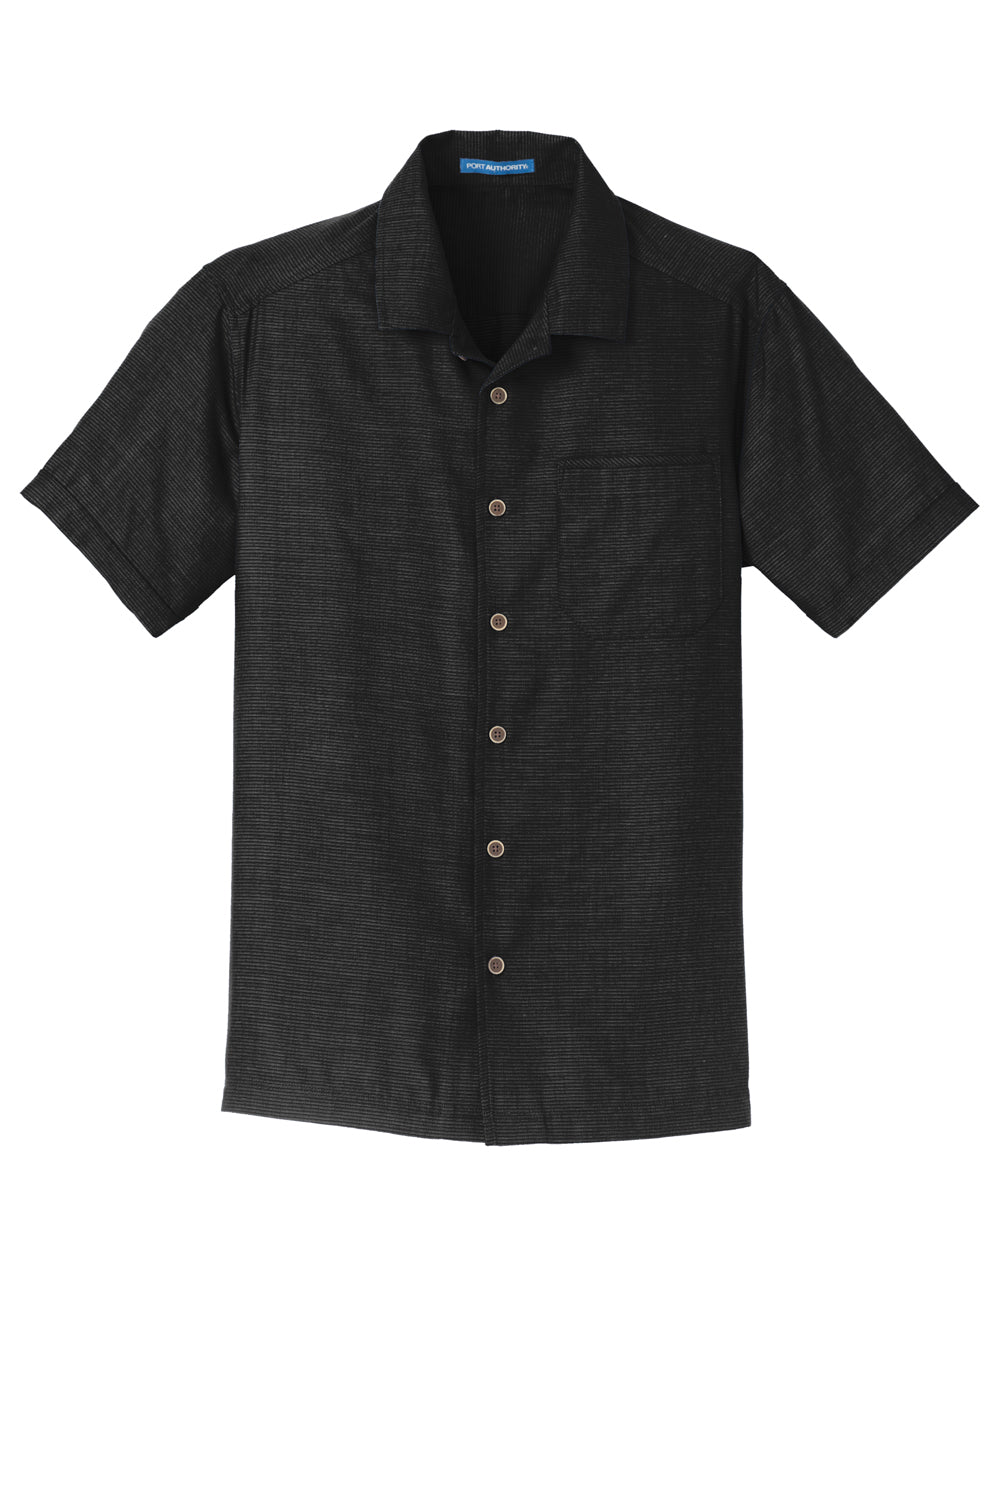 Port Authority S662 Wrinkle Resistant Short Sleeve Button Down Camp Shirt w/ Pocket Black Flat Front